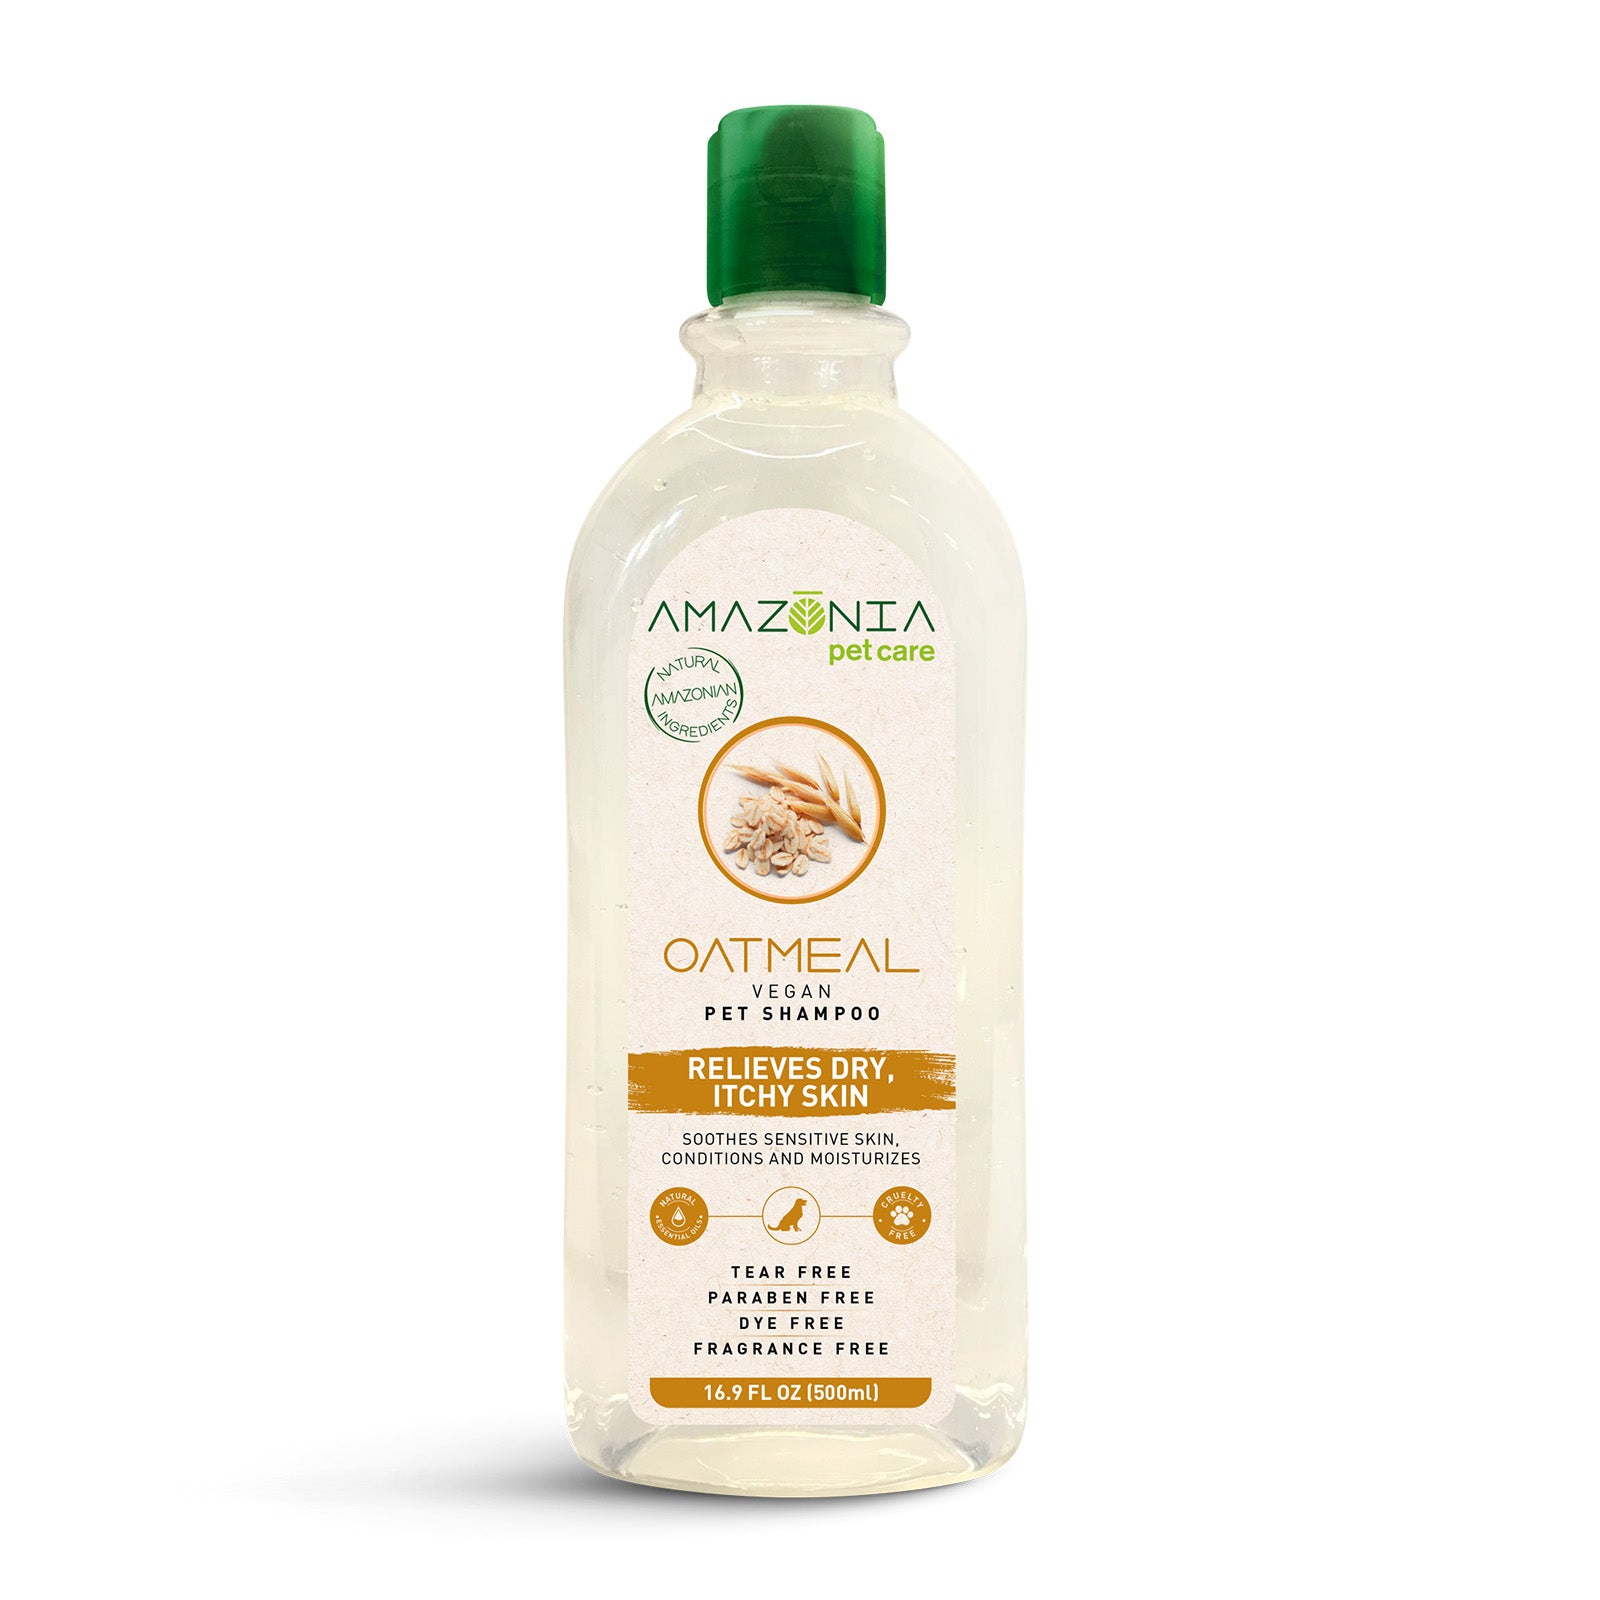 Amazonia Oatmeal Natural Vegan Dry Itchy Skin Shampoo For Dogs